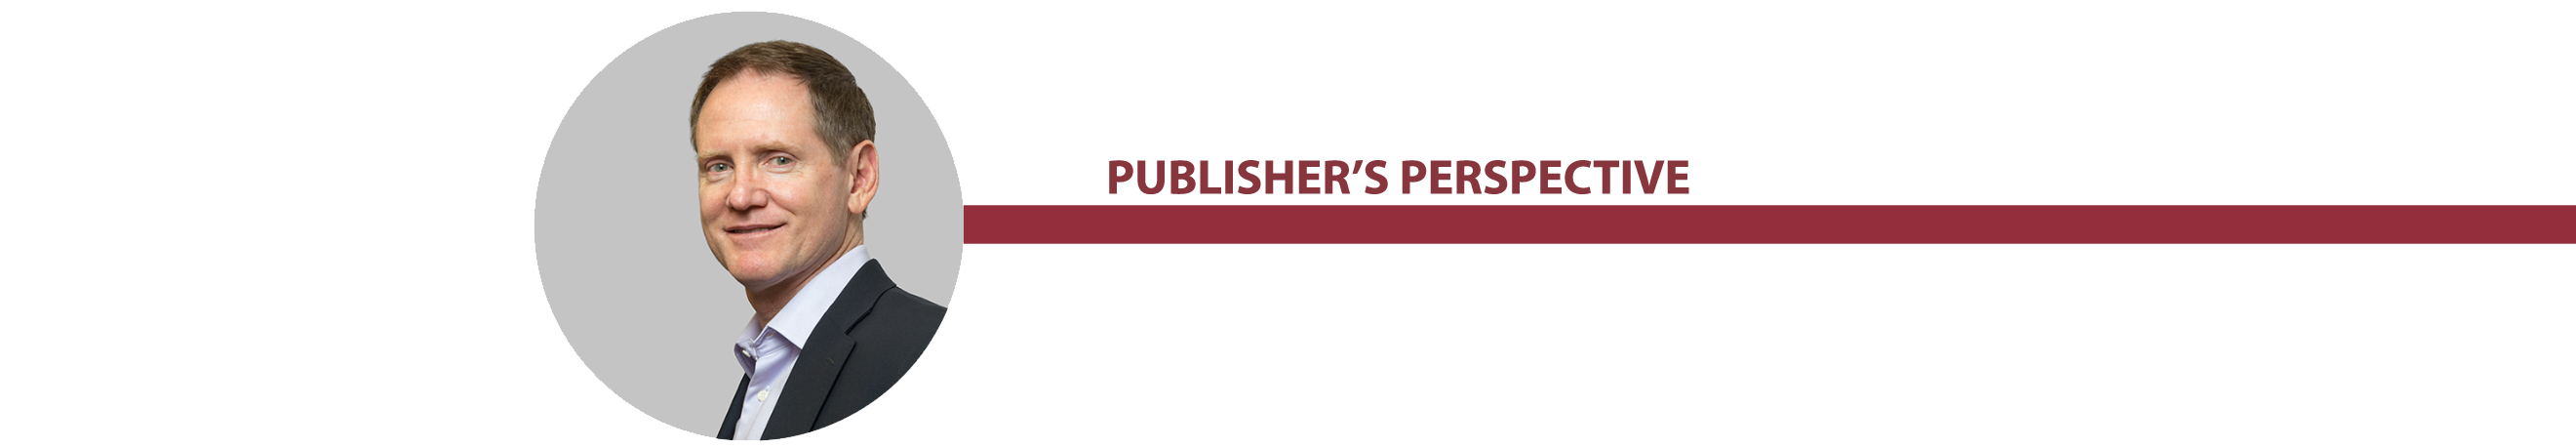 PUBLISHER’S PERSPECTIVE HEADER